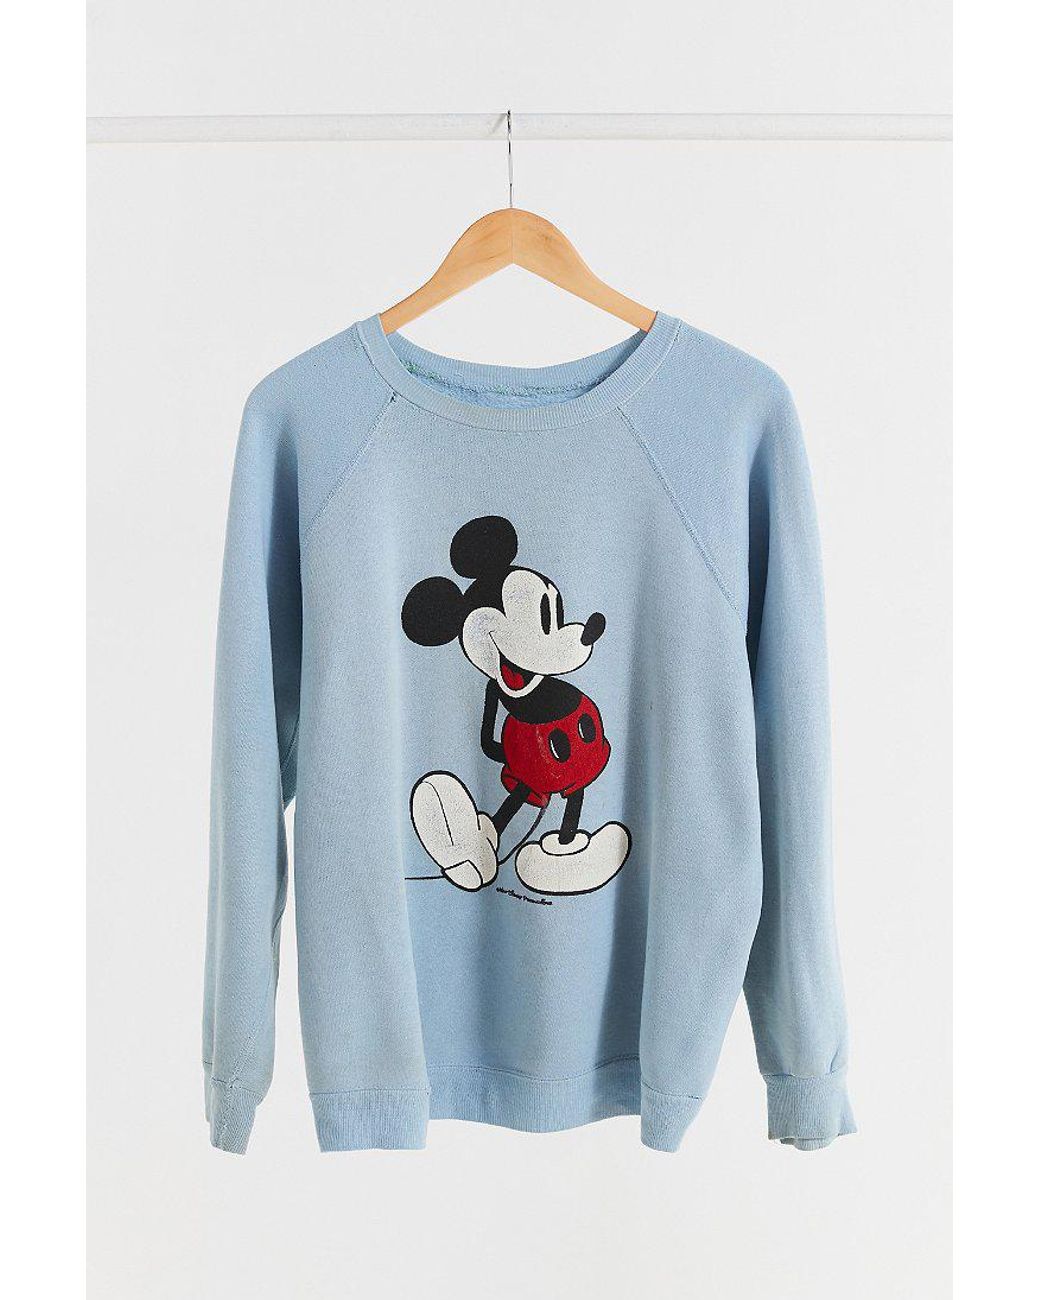 Urban Outfitters Vintage 's Light Blue Mickey Mouse Sweatshirt